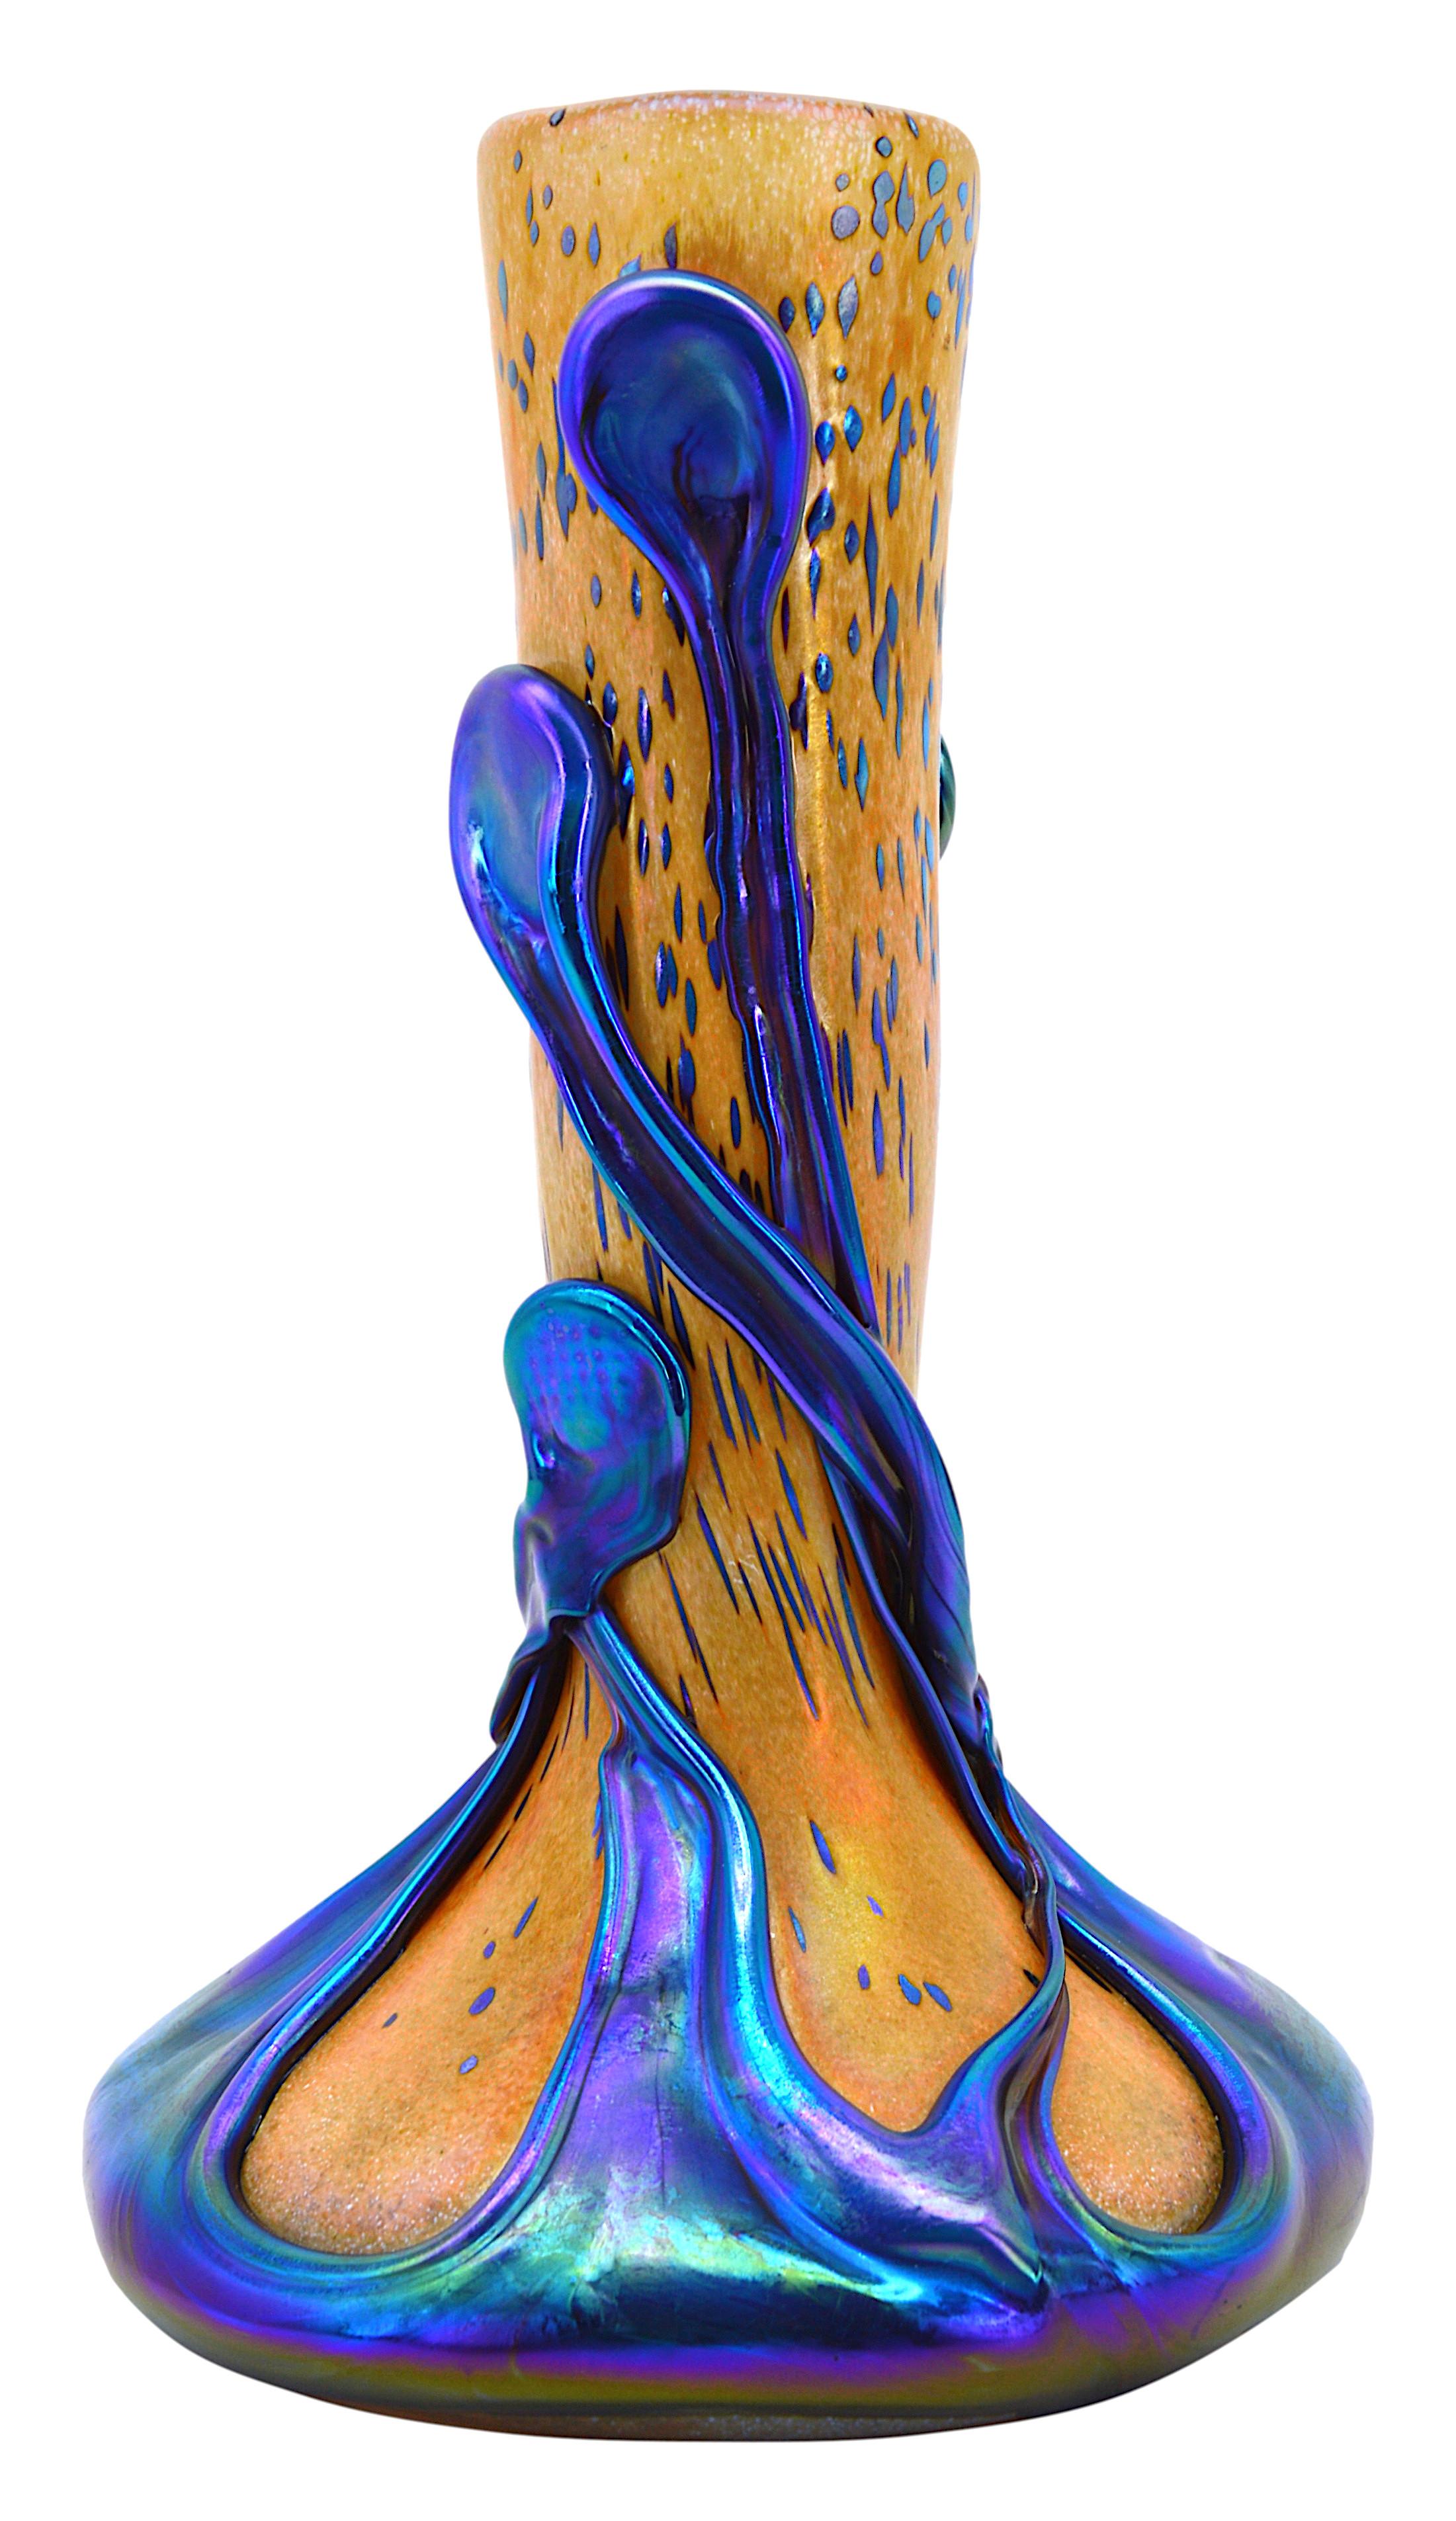 French Michèle Luzoro Art Glass Vase, Biot, 1991 For Sale